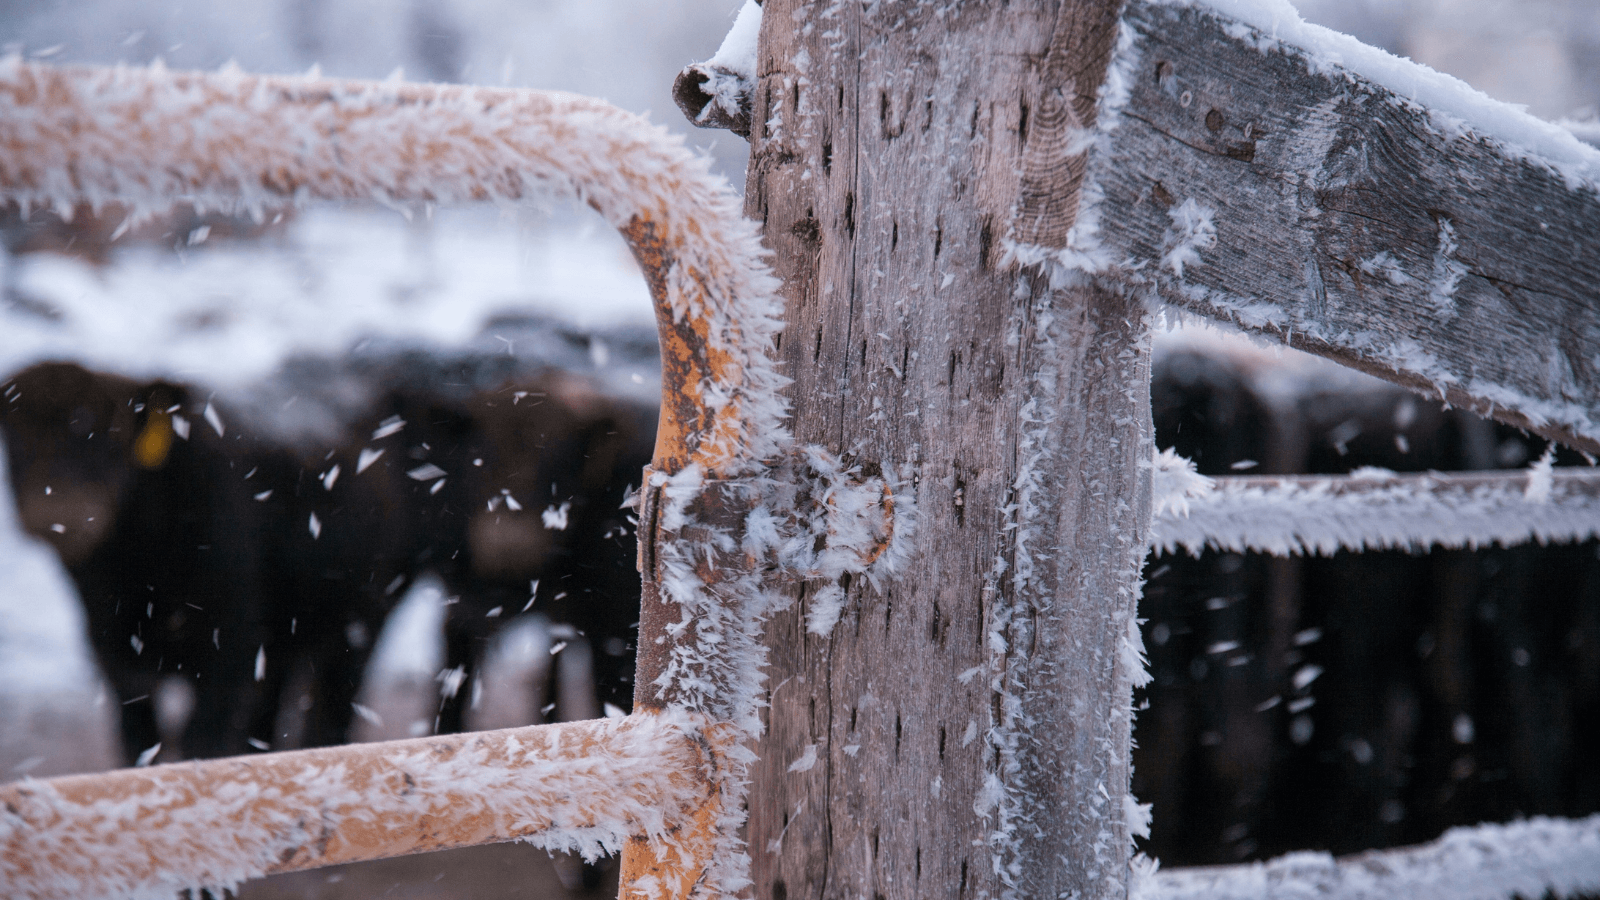 Frozen farm gate during snow storm with cows in background